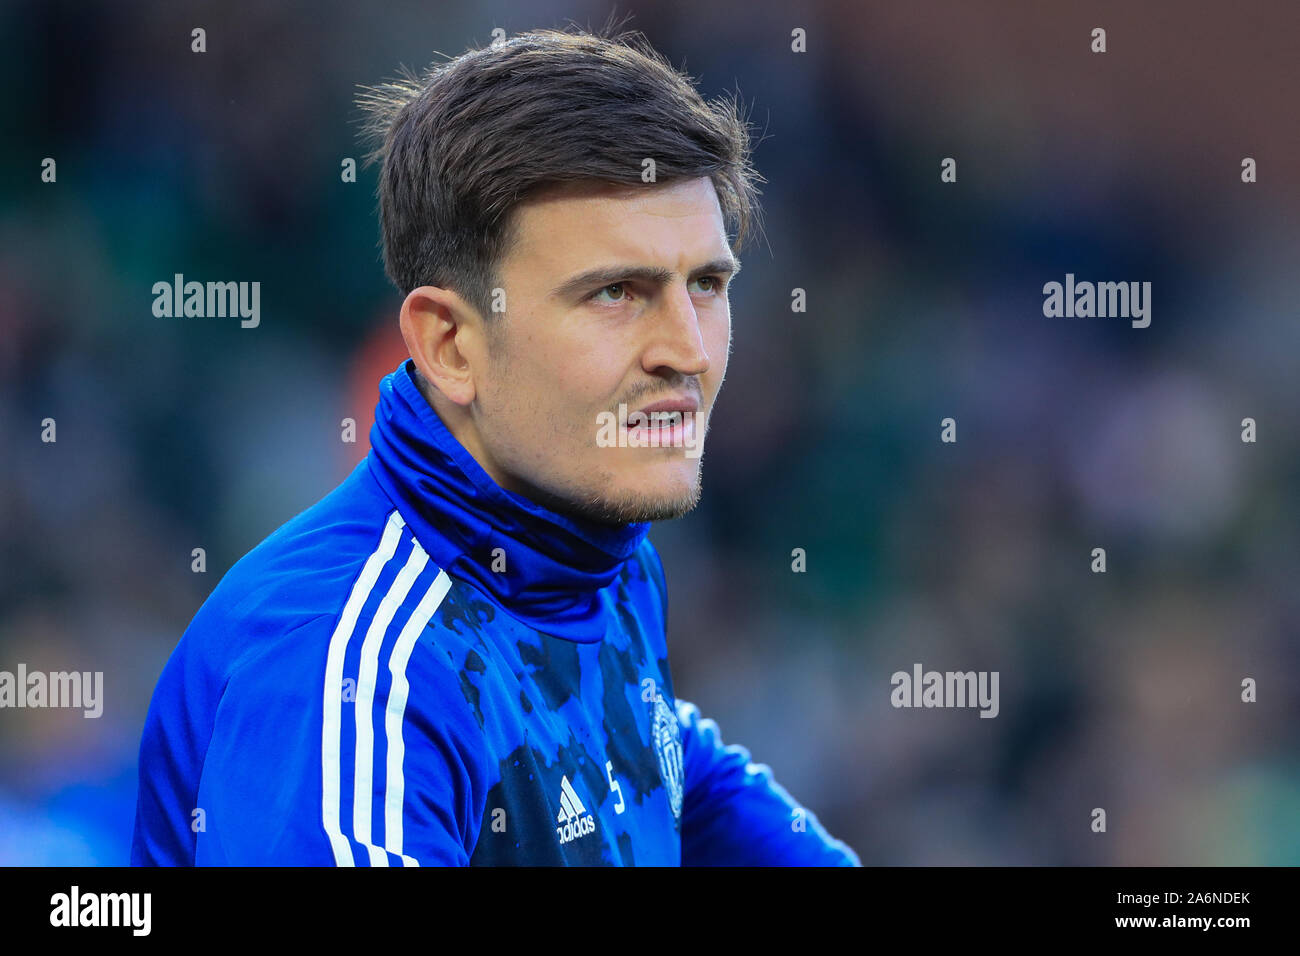 27th October 2019, Carrow Road, Norwich, England; Premier League, Norwich City v Manchester United : Harry Maguire (5) of Manchester United warming up  Credit: Mark Cosgrove/News Images Stock Photo